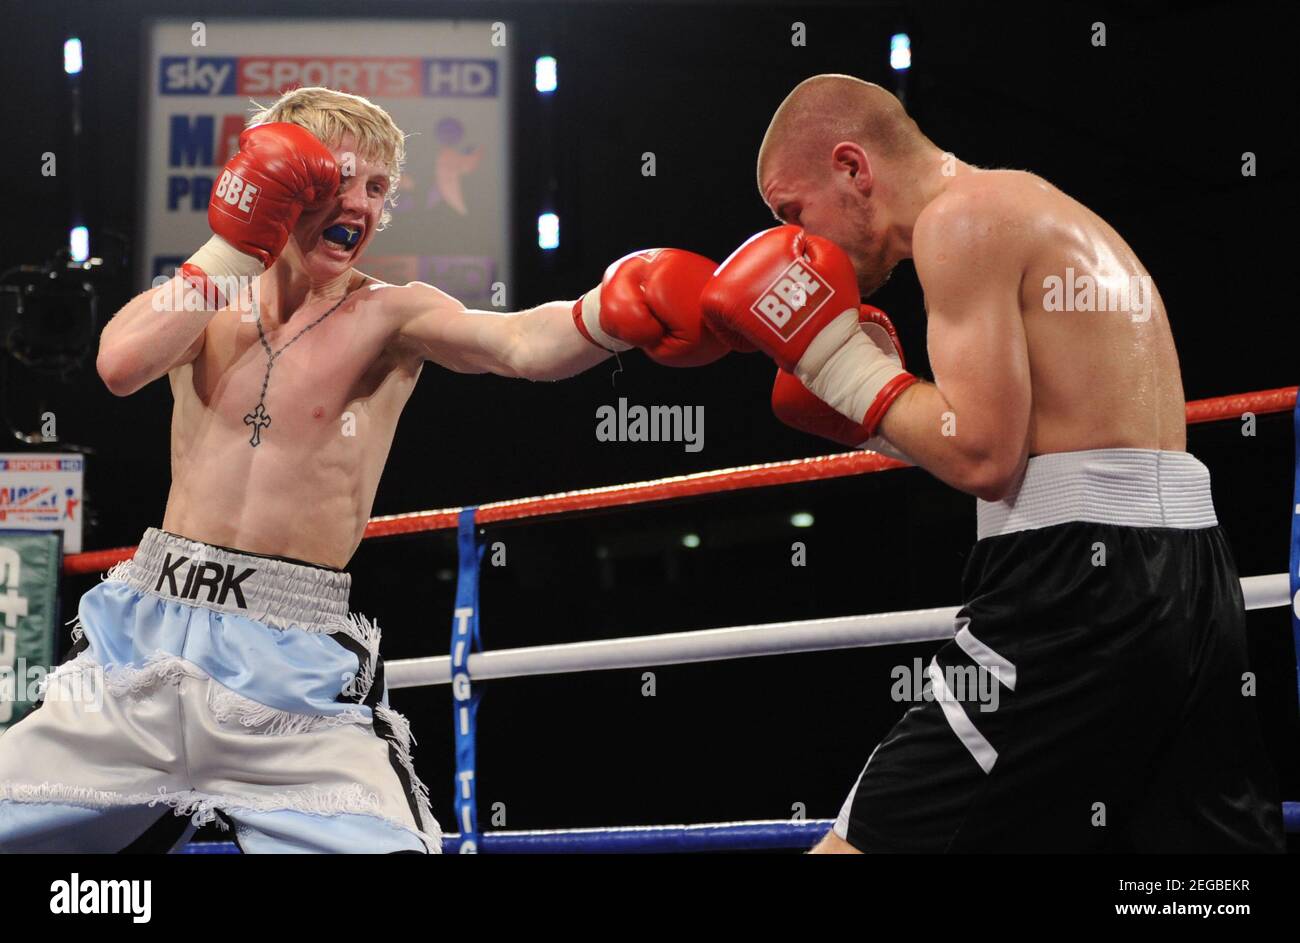 Boxing - Kirk Goodings v Pavels Senkovs - Lightweight Fight - Leigh Indoor Sports Village - 19/3/10  Kirk Goodings (L) in action against Pavels Senkovs   Mandatory Credit: Action Images / Alex Morton Stock Photo